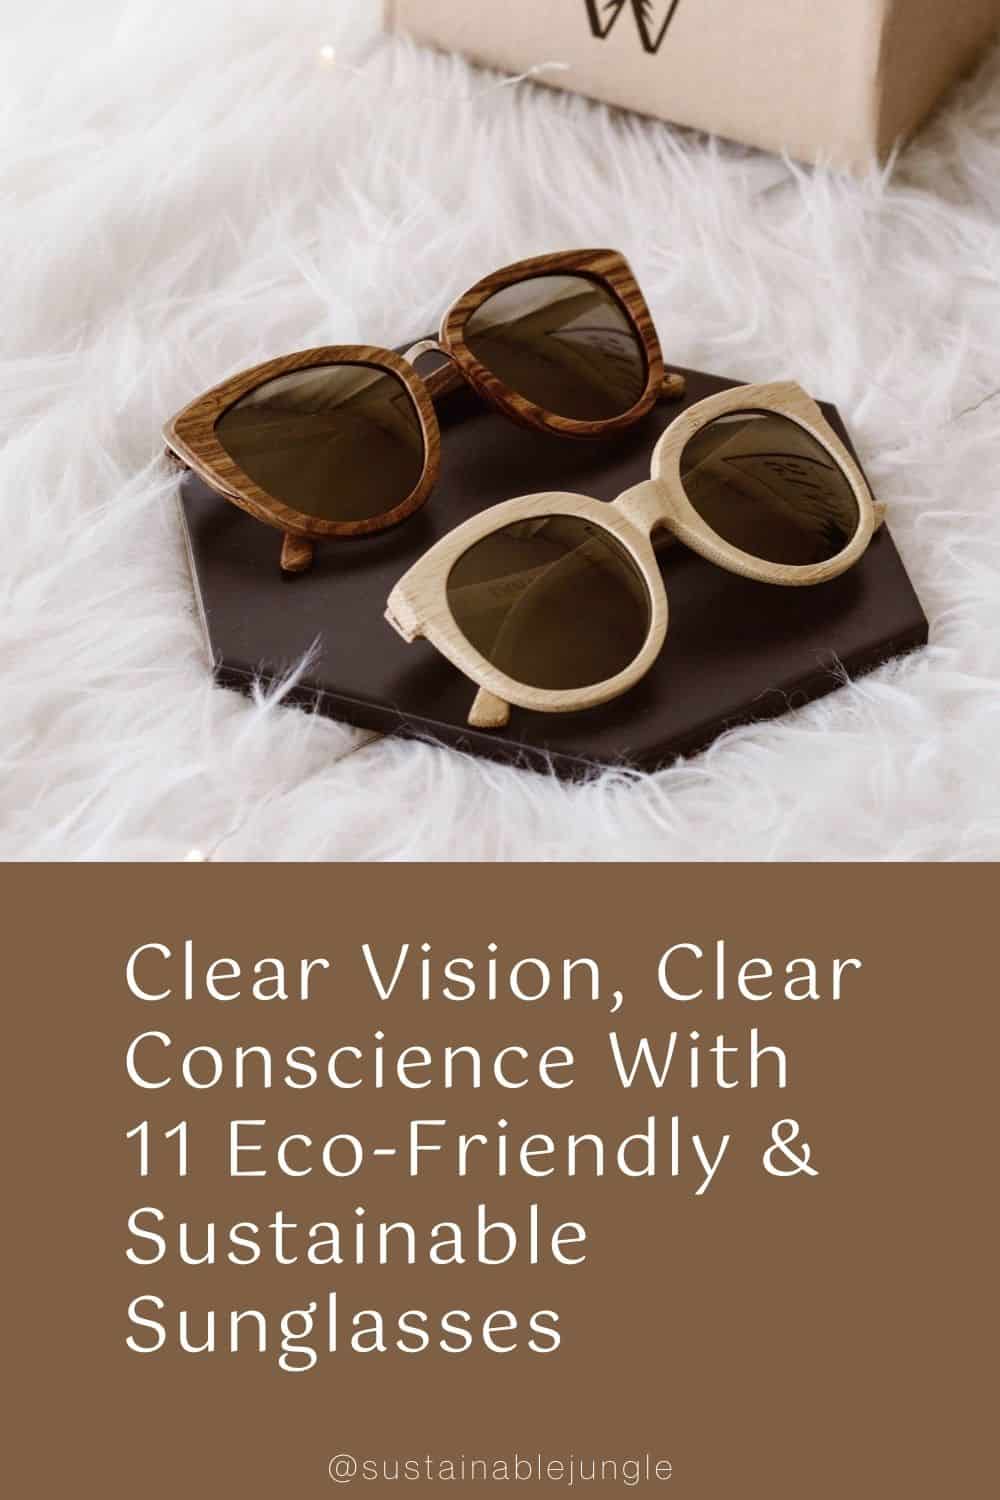 Clear Vision, Clear Conscience With 11 Eco-Friendly & Sustainable Sunglasses Image by Woodzee #sustainablesunglasses #sustainablesunglassesbrands #bestsustainablesunglasses #ecofriendlysunglasses #ecosunglasses #ethicalsustainablesunglasses #sustainablejungle